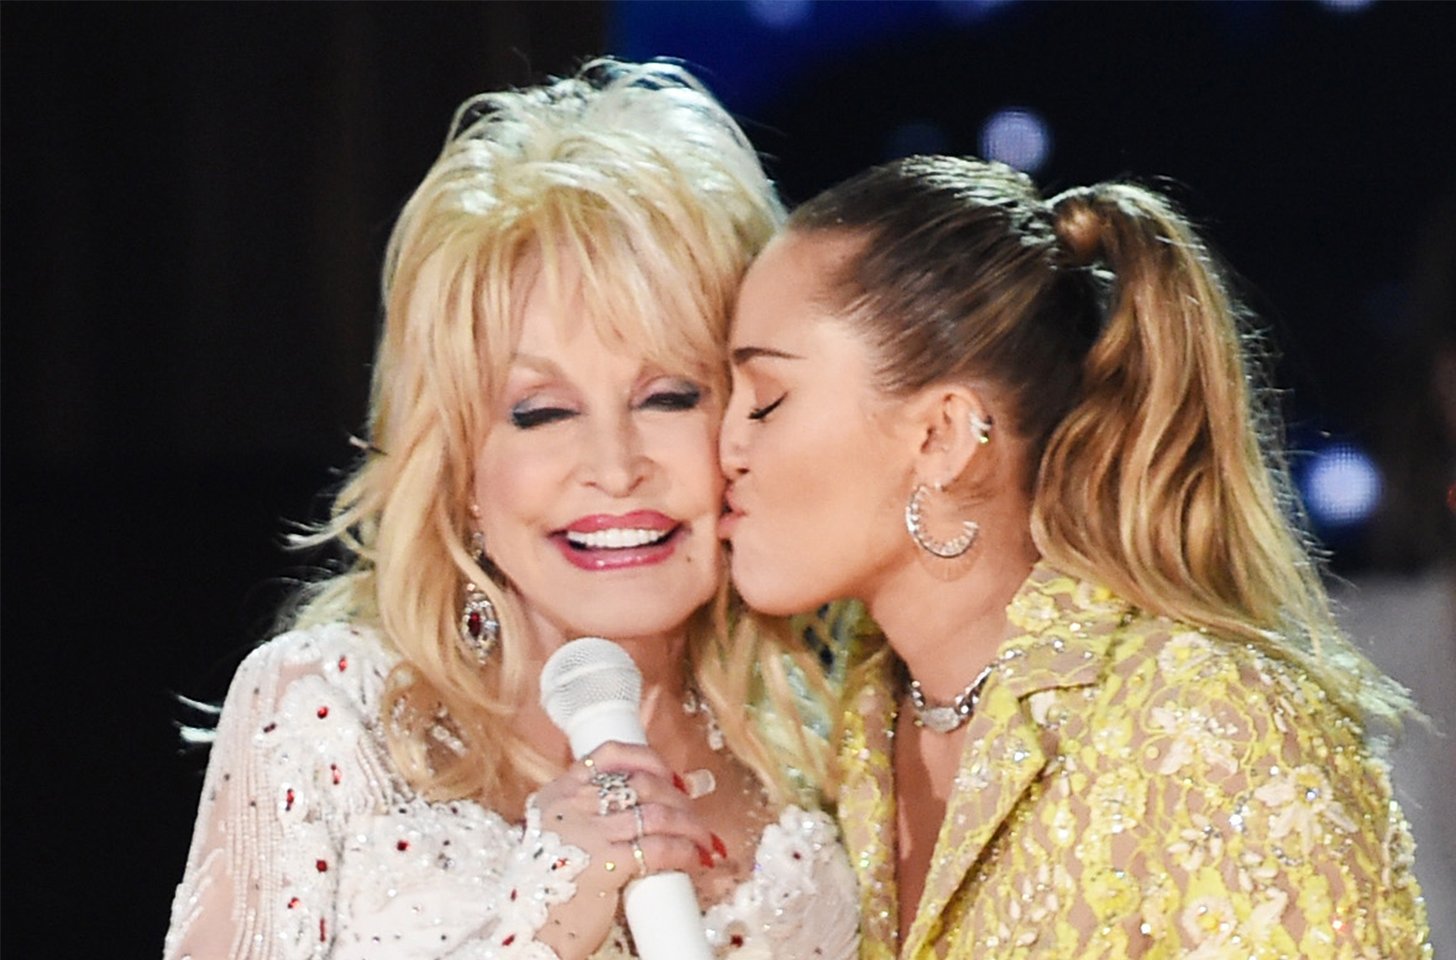 Miley Cyrus Calls Dolly Parton a ‘Godlike Figure’ In Touching Essay